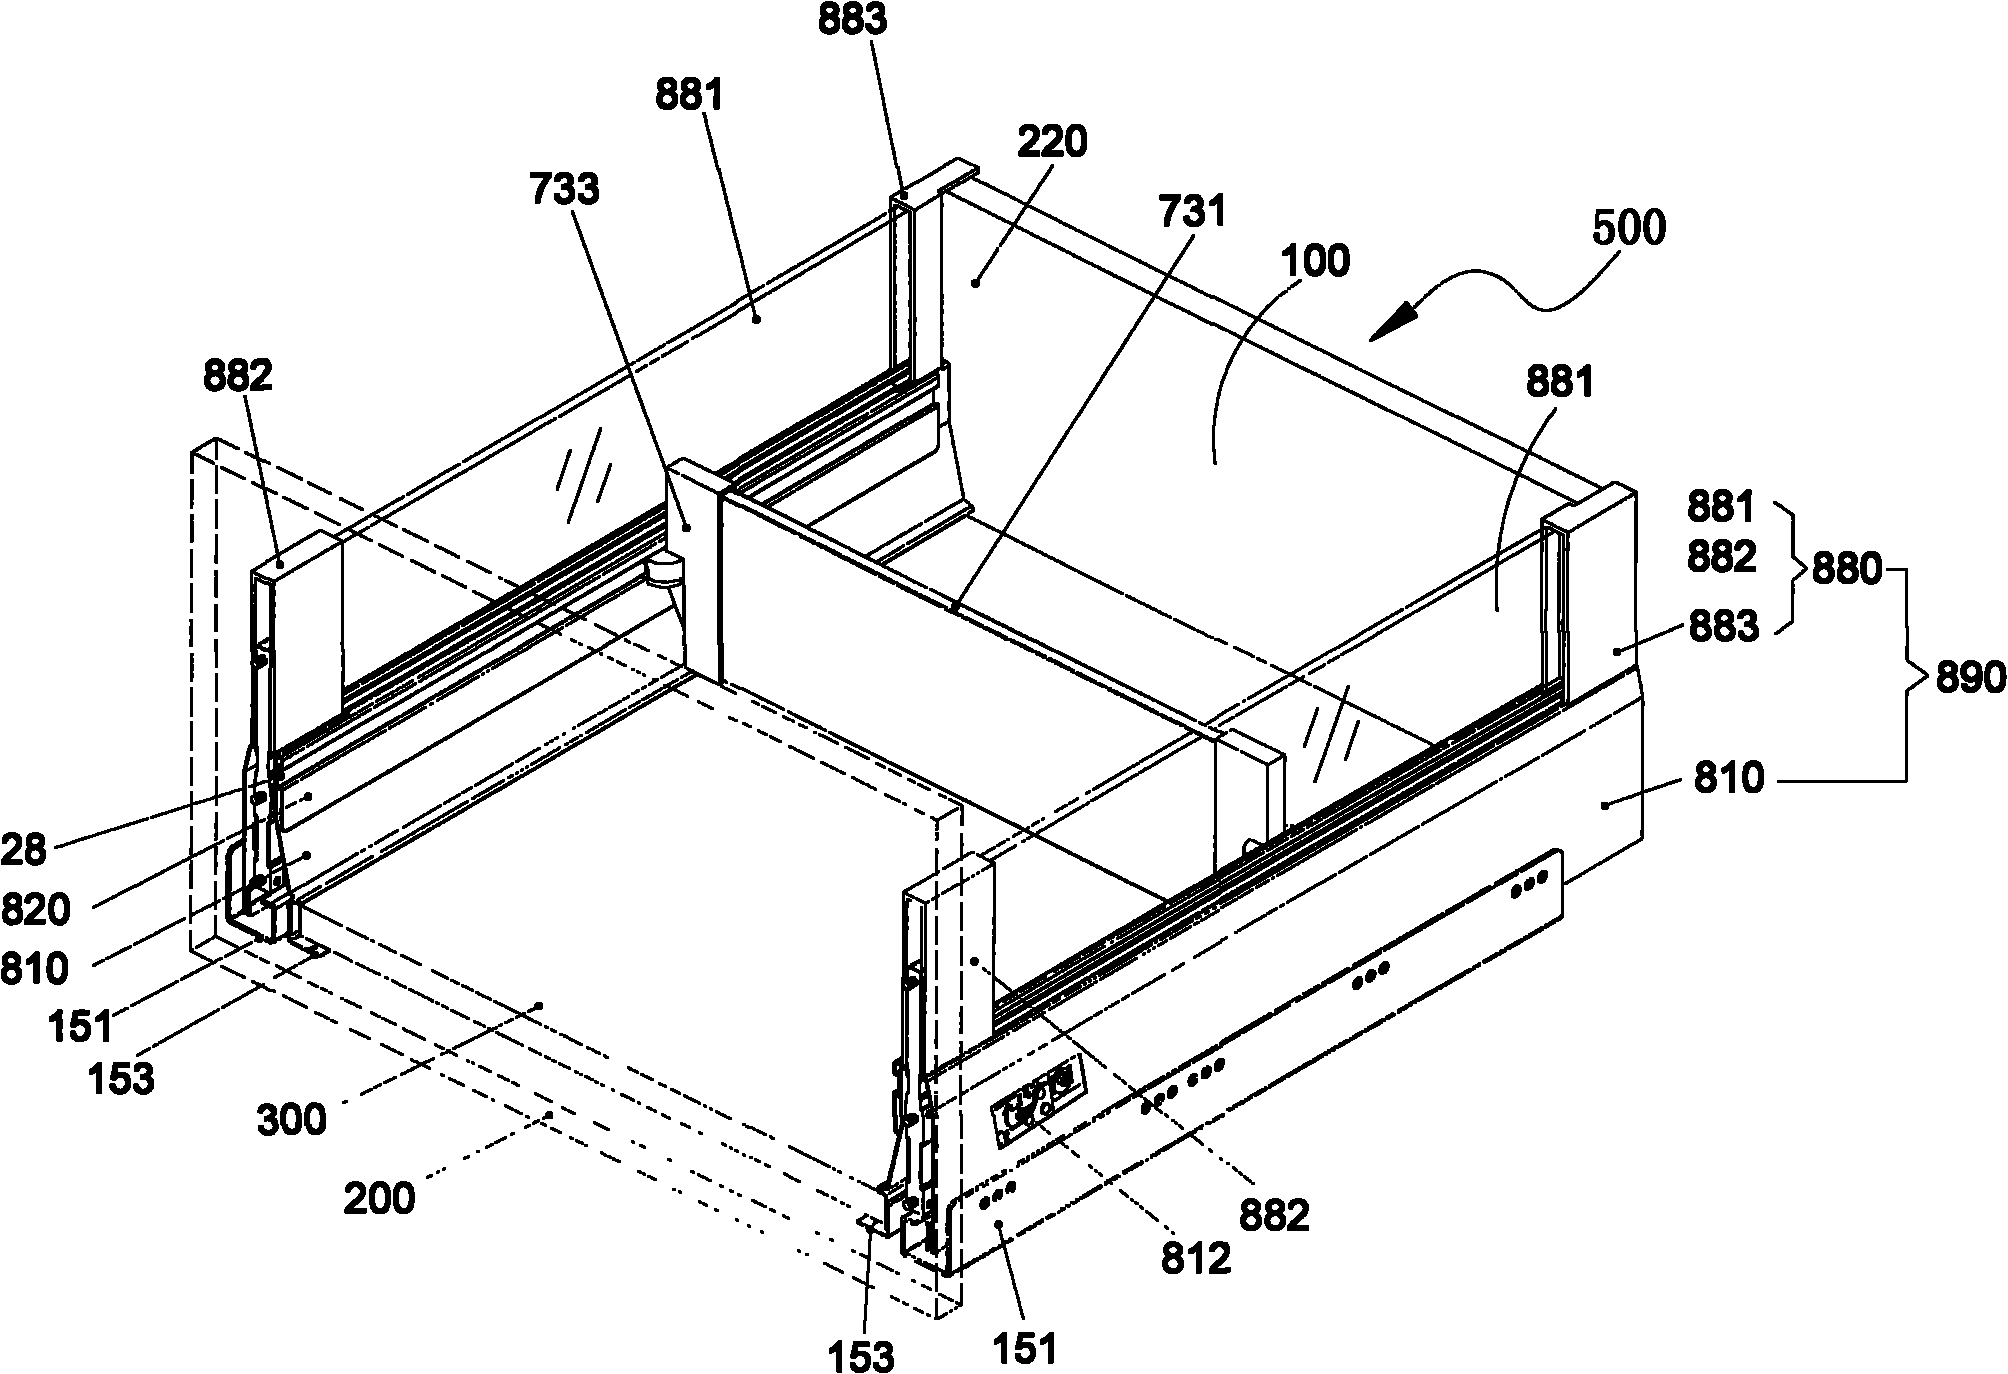 Heightened drawer side plate structure